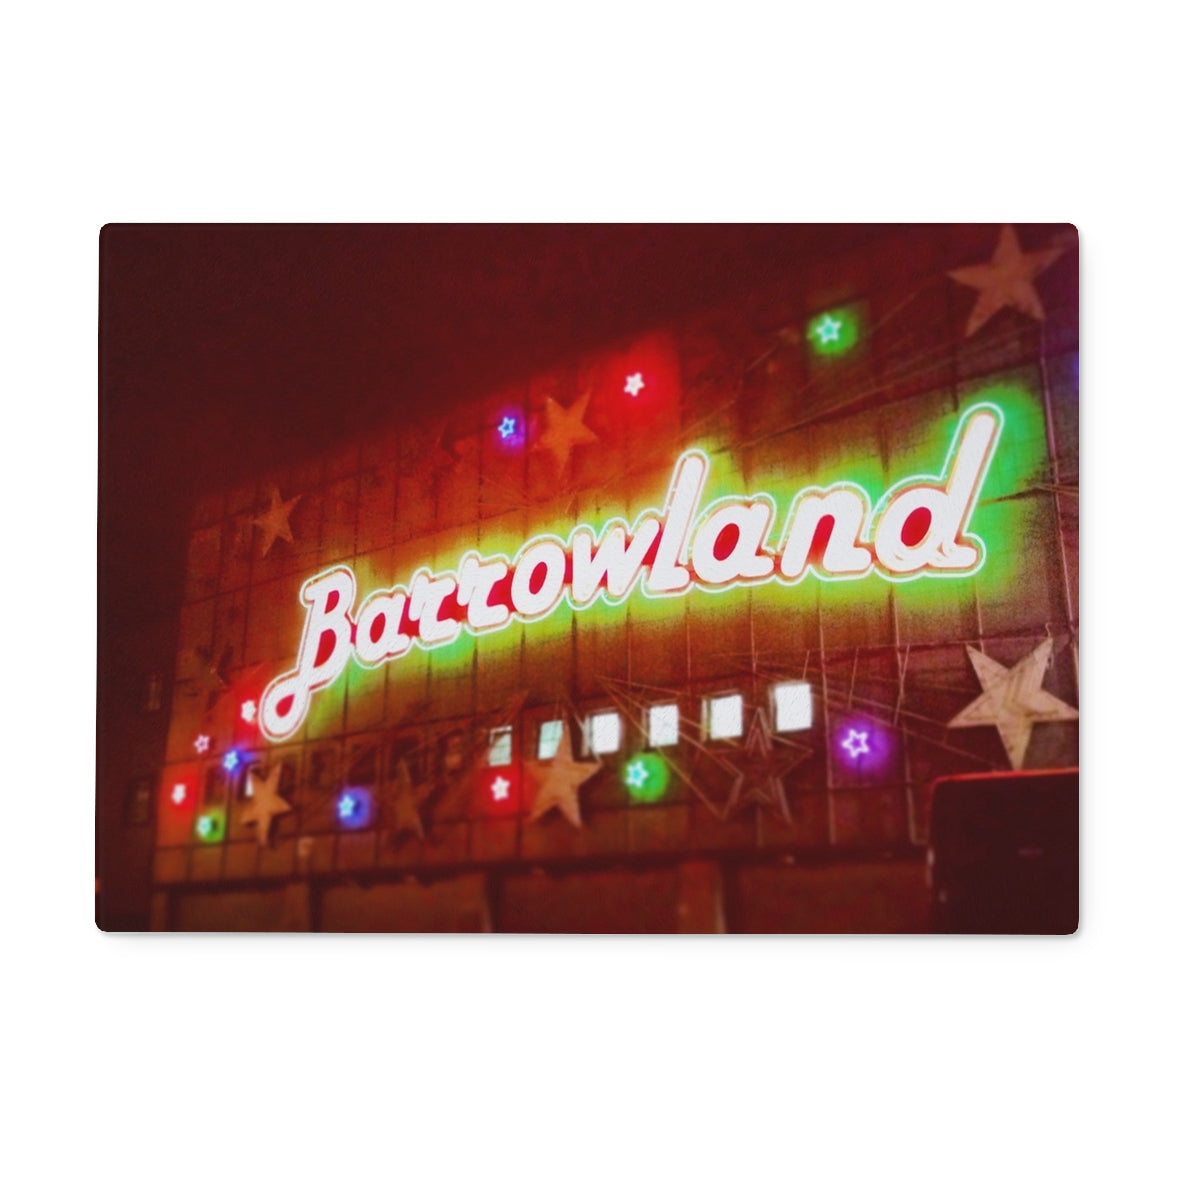 A Neon Glasgow Barrowlands Art Gifts Glass Chopping Board-Glass Chopping Boards-Edinburgh & Glasgow Art Gallery-15"x11" Rectangular-Paintings, Prints, Homeware, Art Gifts From Scotland By Scottish Artist Kevin Hunter